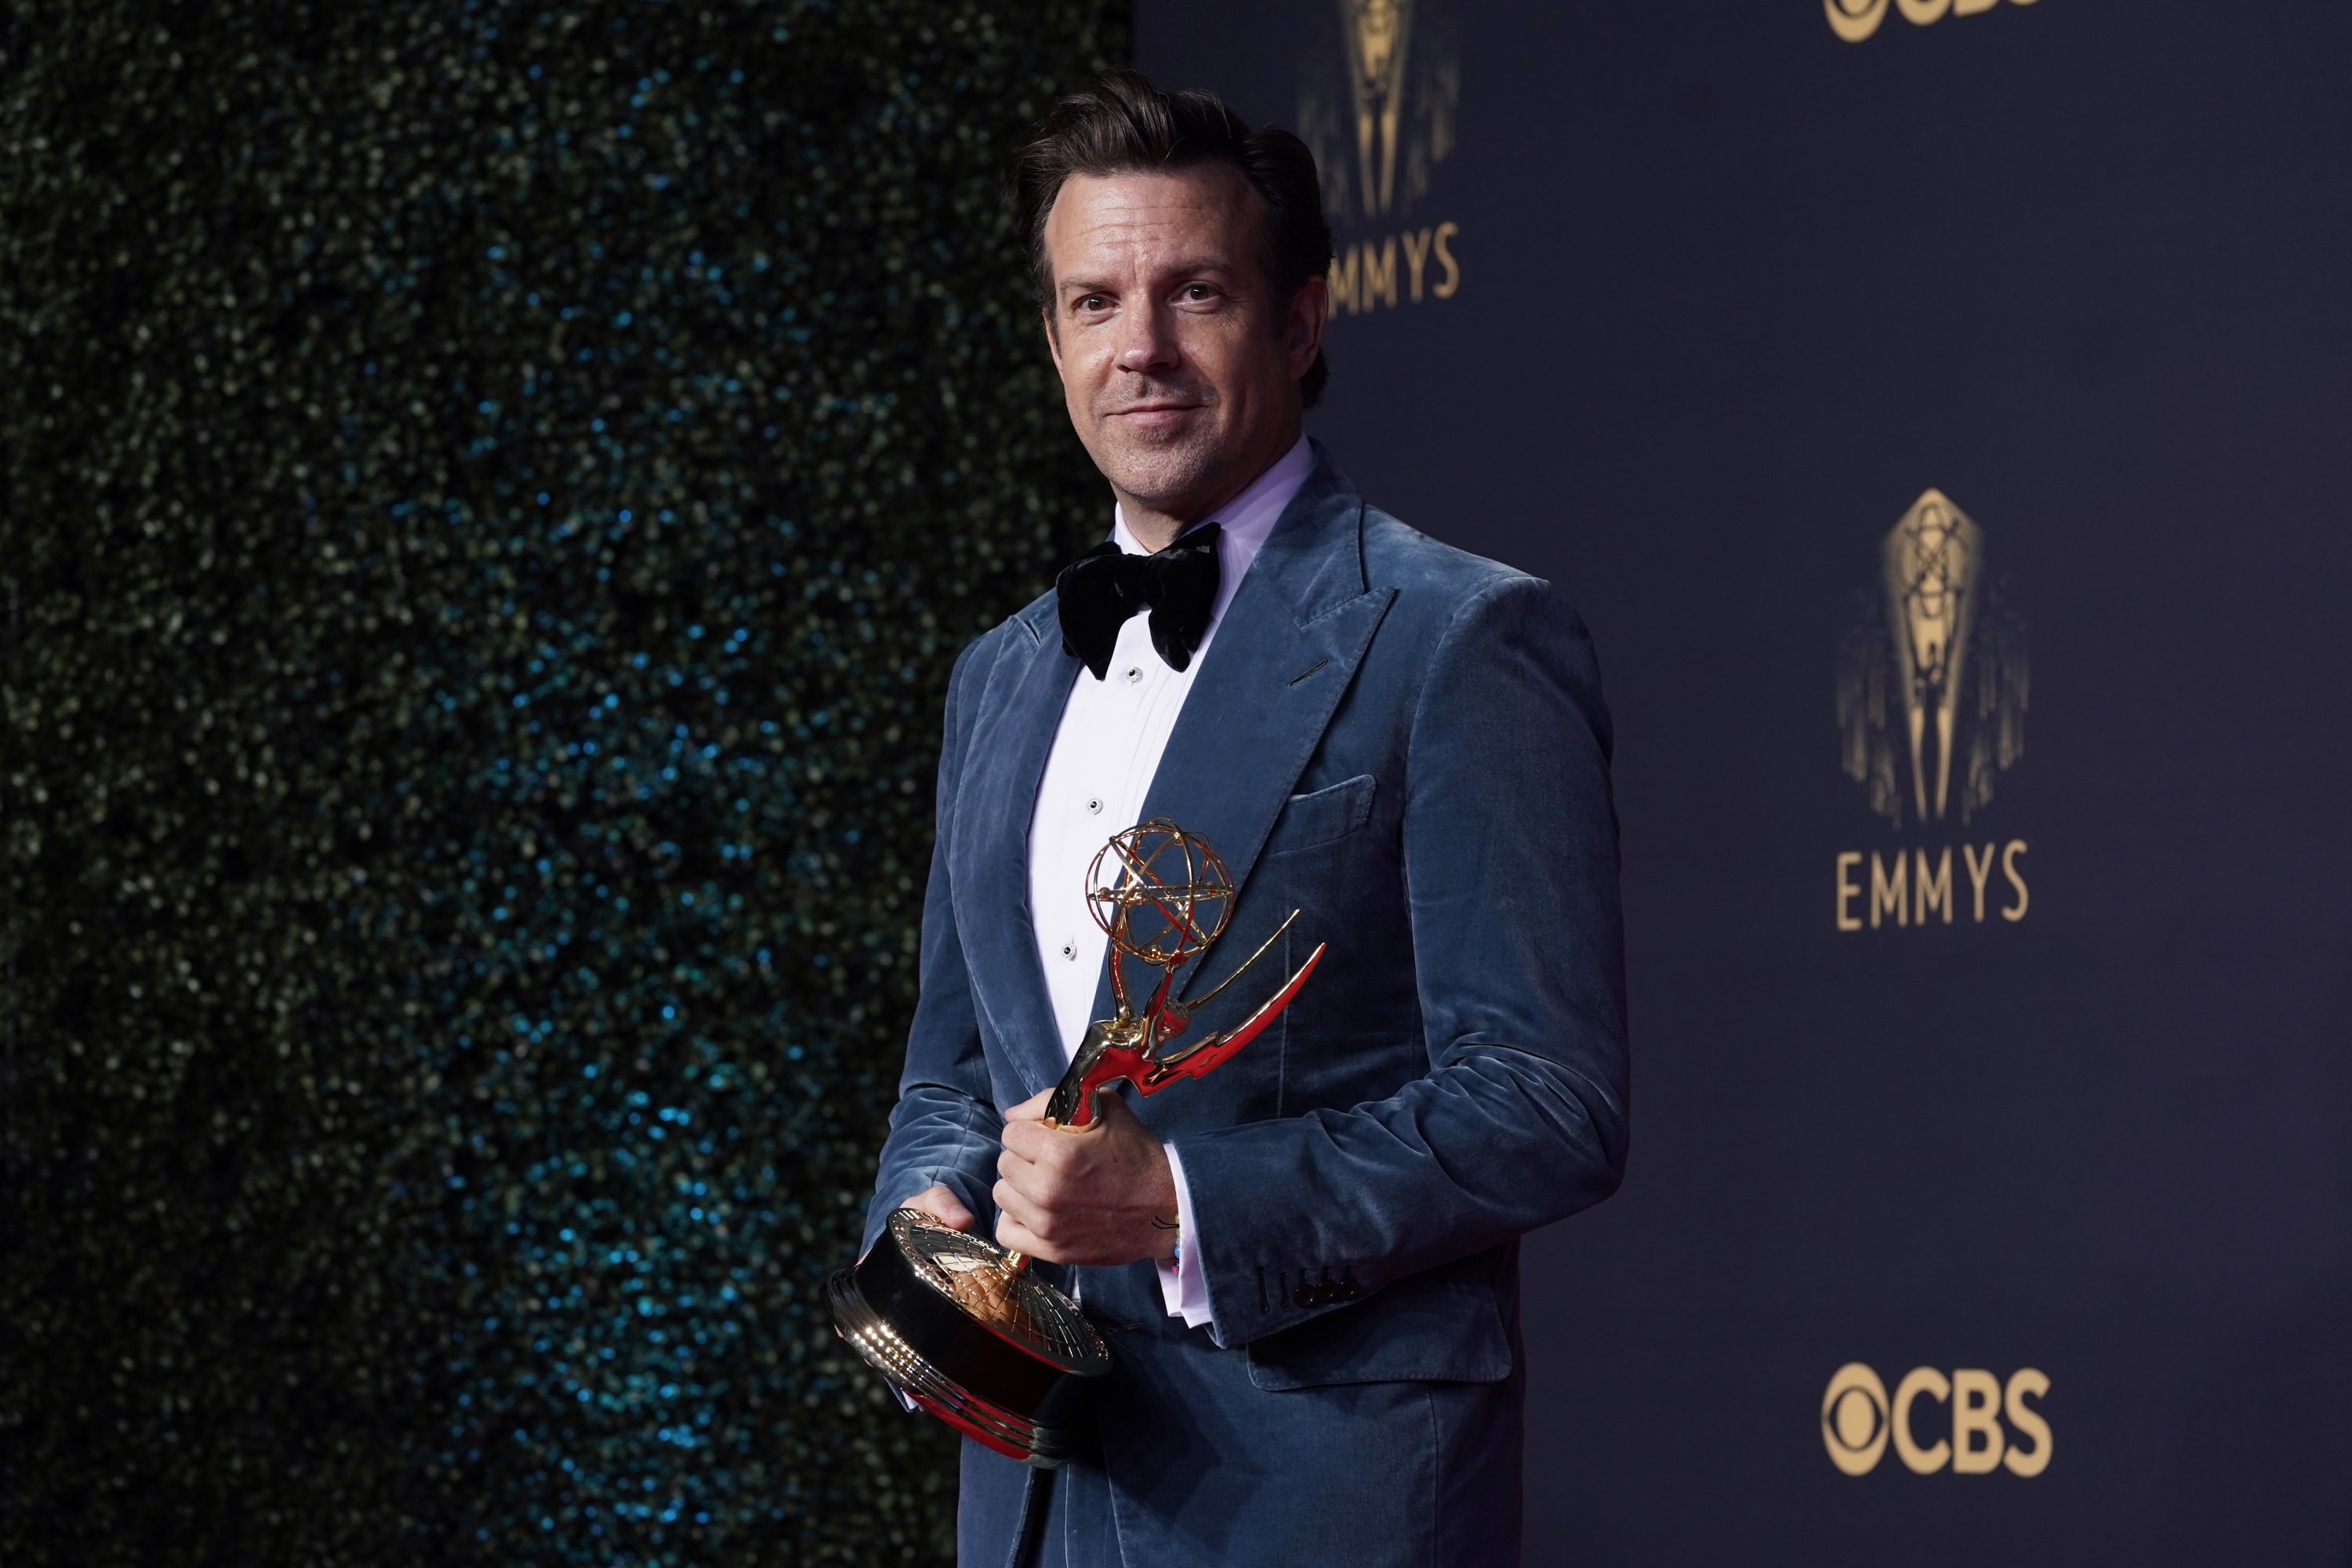 Jason Sudeikis, winner of the award for outstanding lead actor in a comedy series for 'Ted Lasso,' poses the 73rd Primetime Emmy Awards at L.A. Live in Los Angeles, California, U.S., Sept. 19, 2021. (AP Photo)